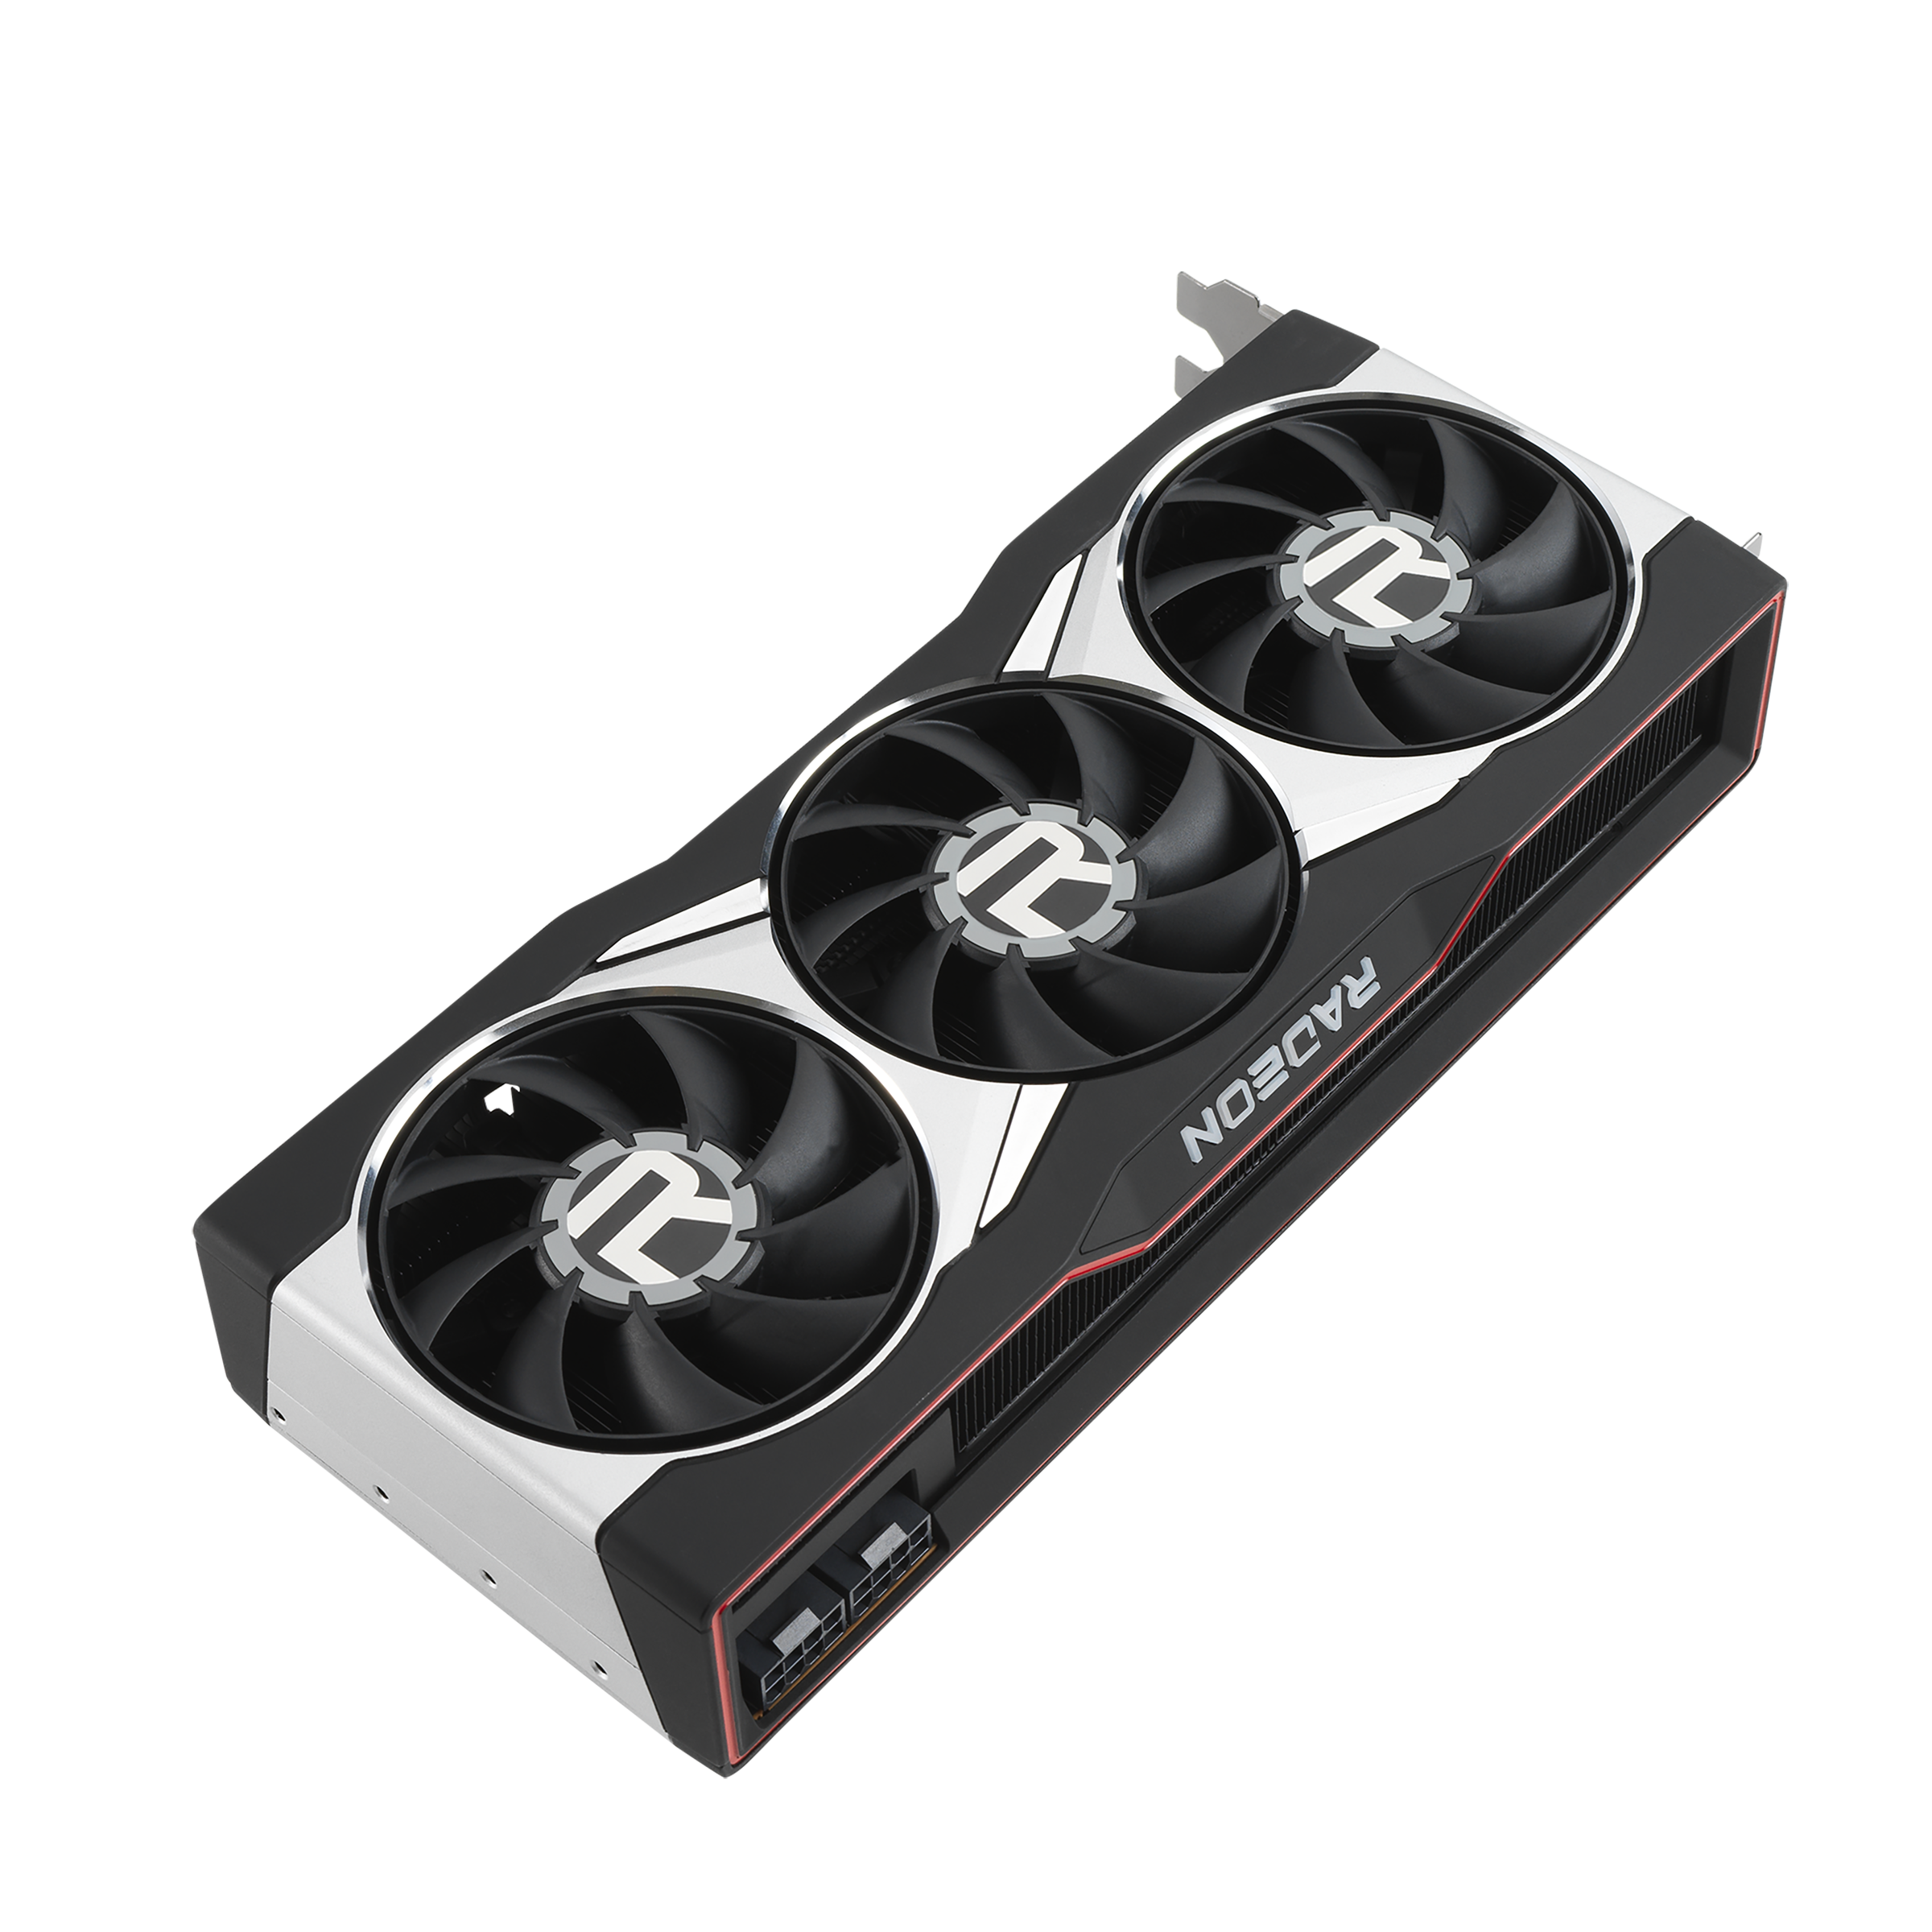 AMD Radeon RX 6800 XT Reference Edition Gaming Graphics Card